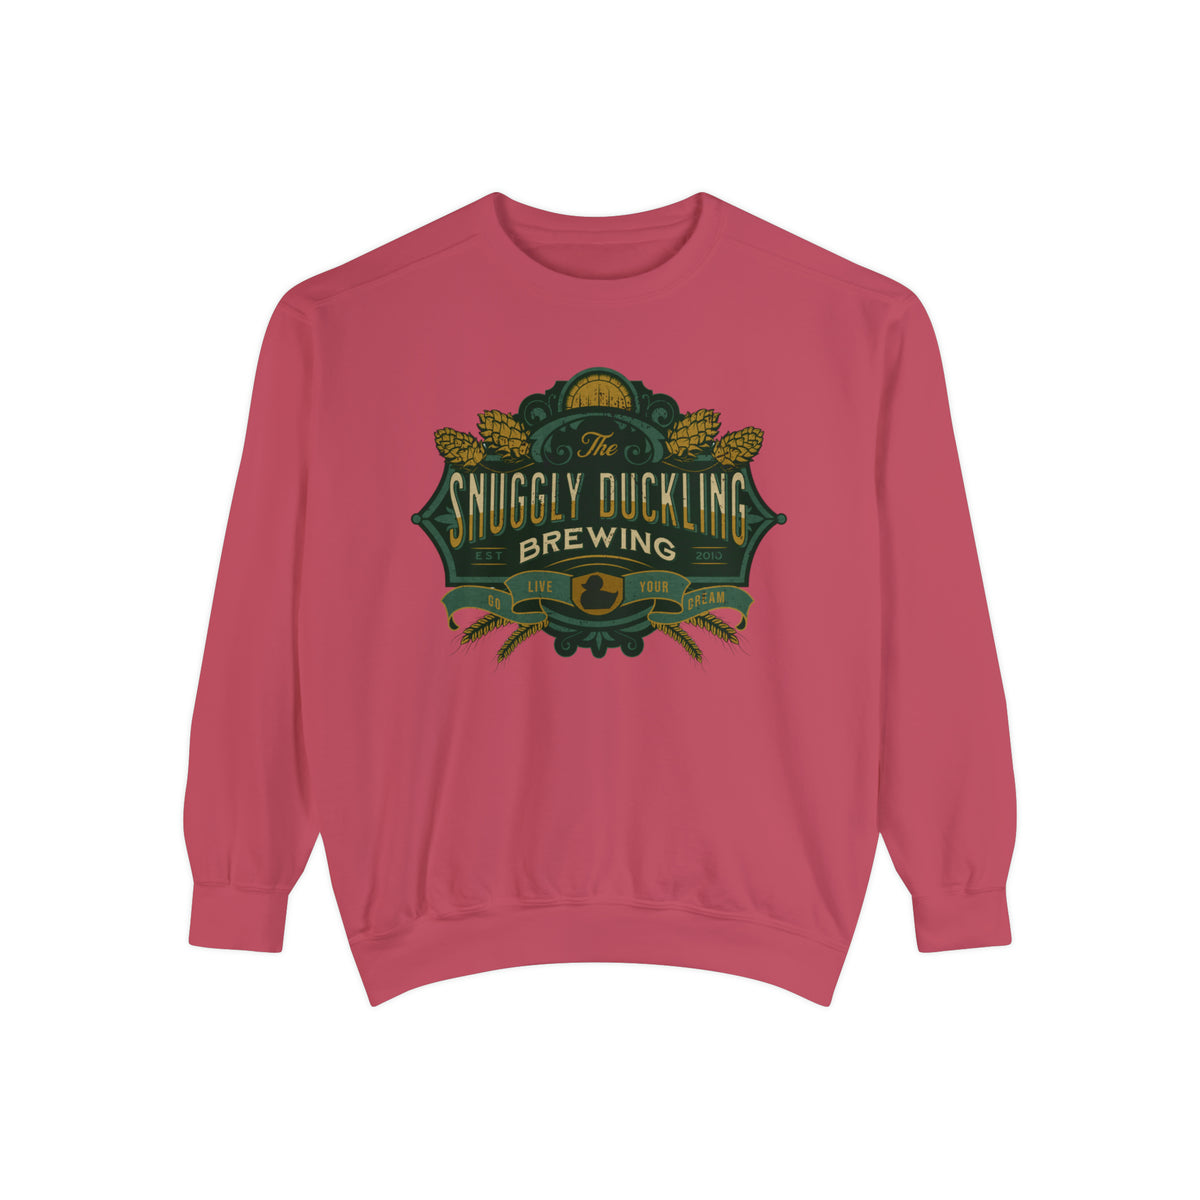 The Snuggly Duckling Brewing Comfort Colors Unisex Garment-Dyed Sweatshirt